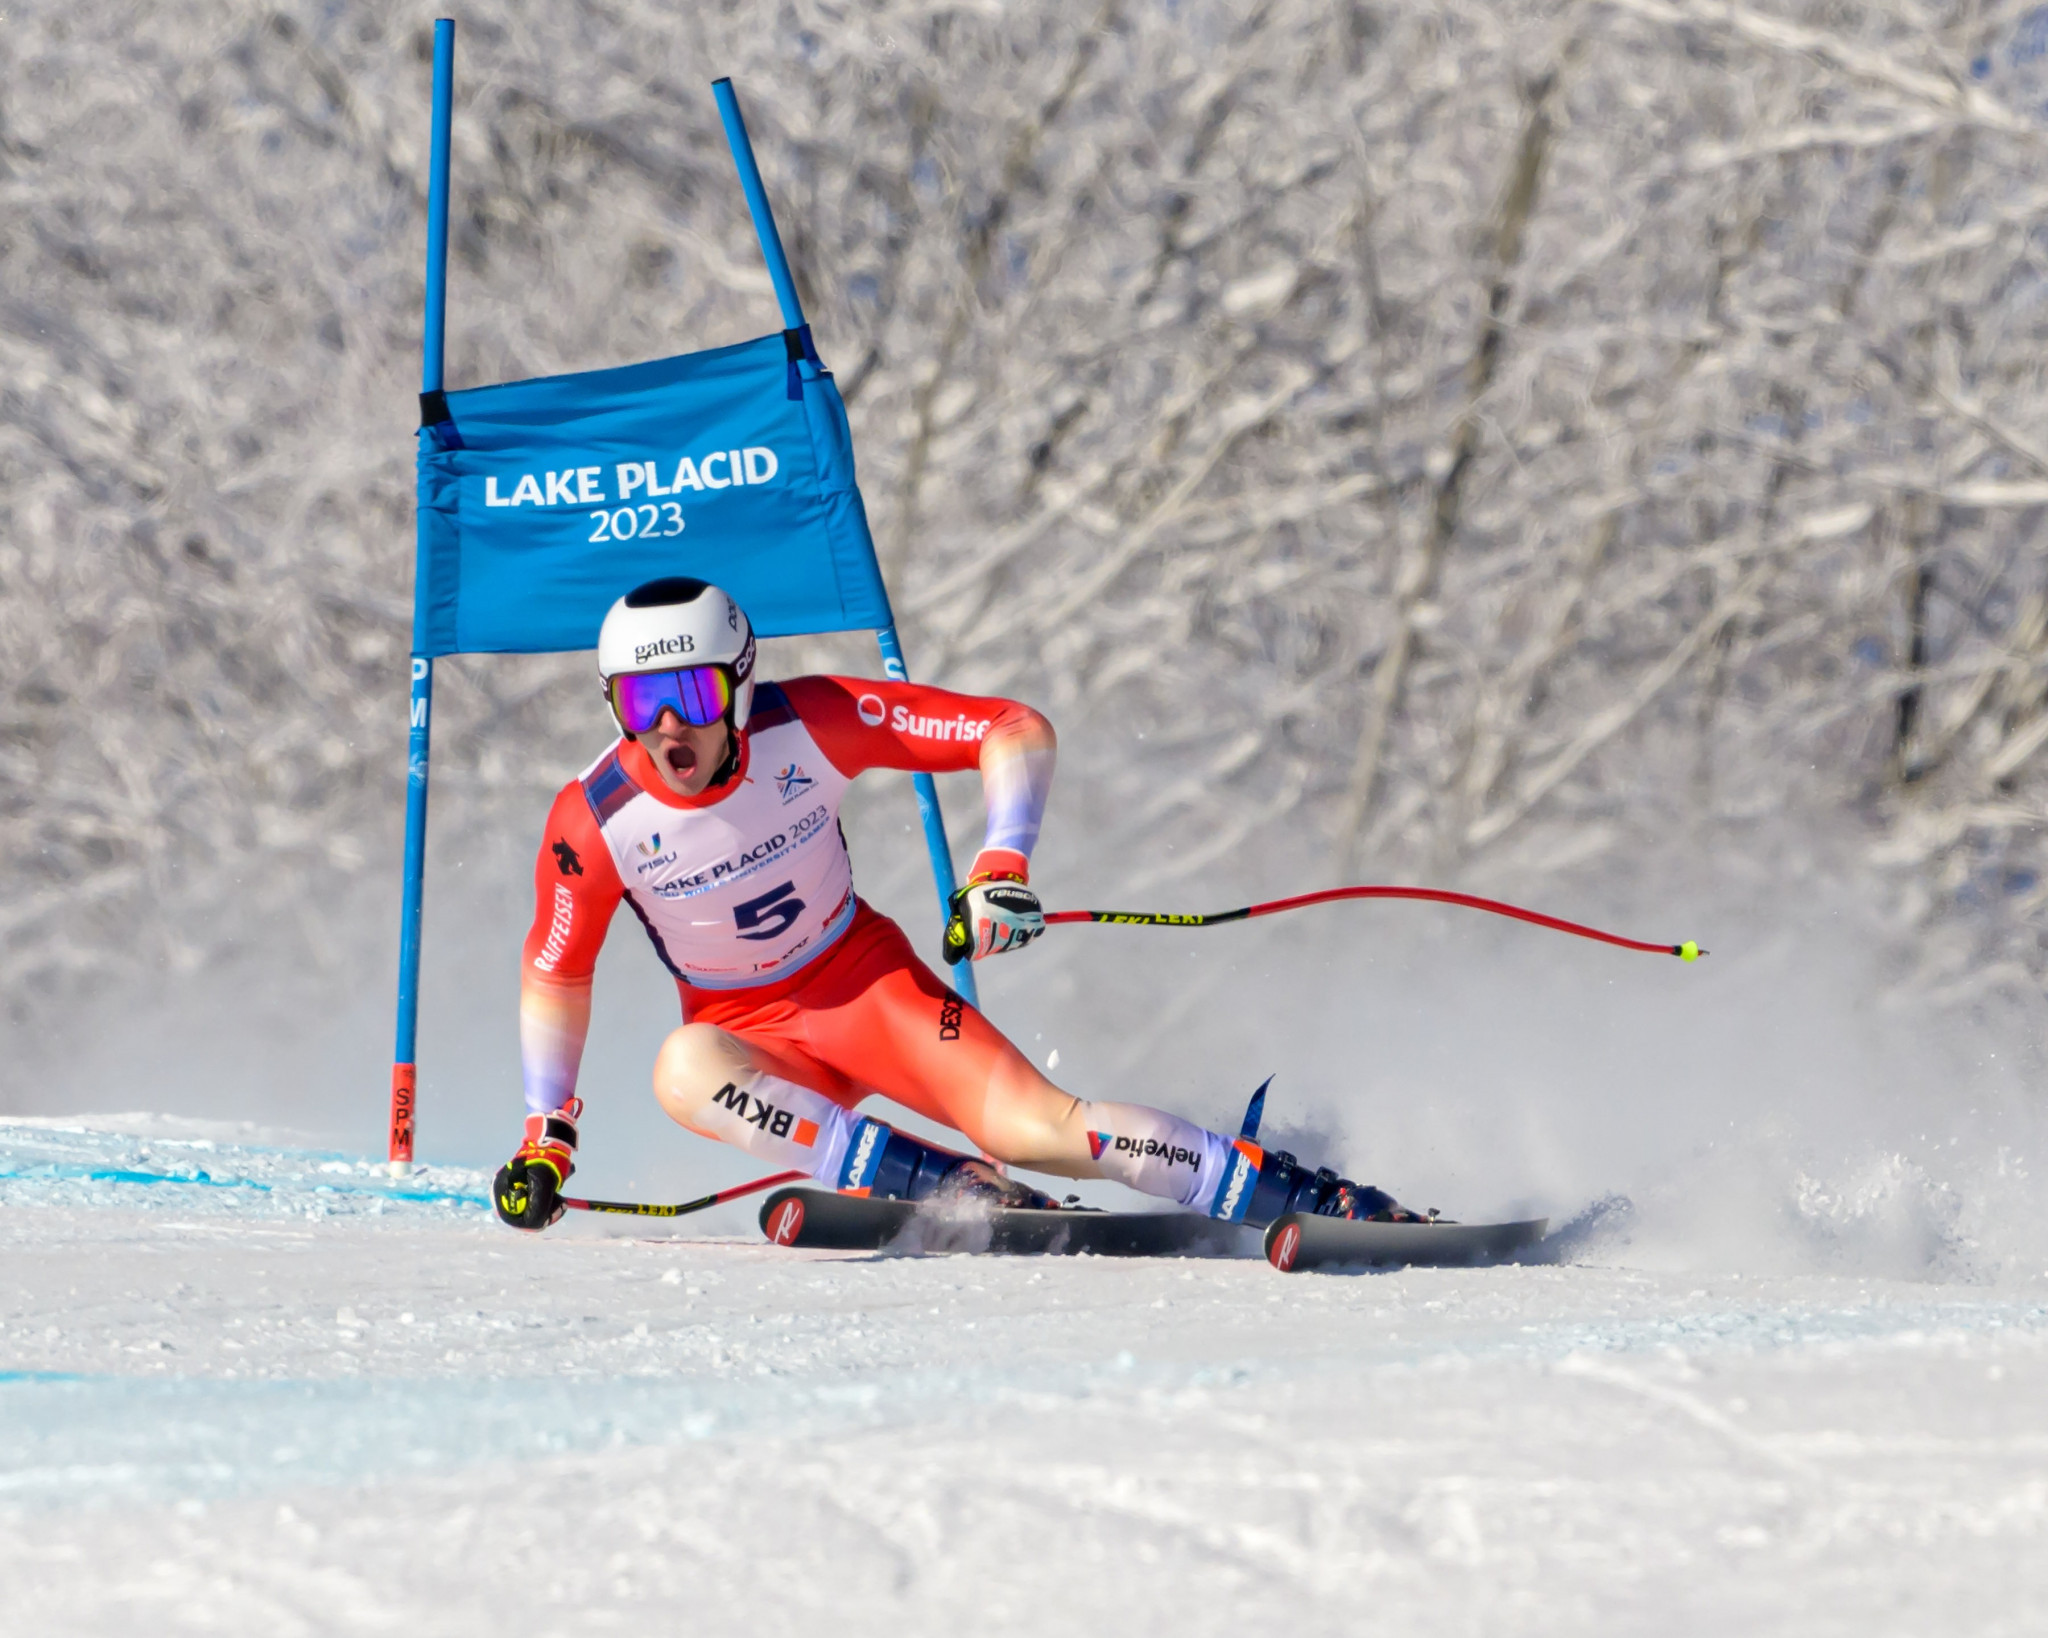 A Sports Council is due to be reformed in Lake Placid to focus on holding sporting events and getting residents involved in volunteering ©FISU